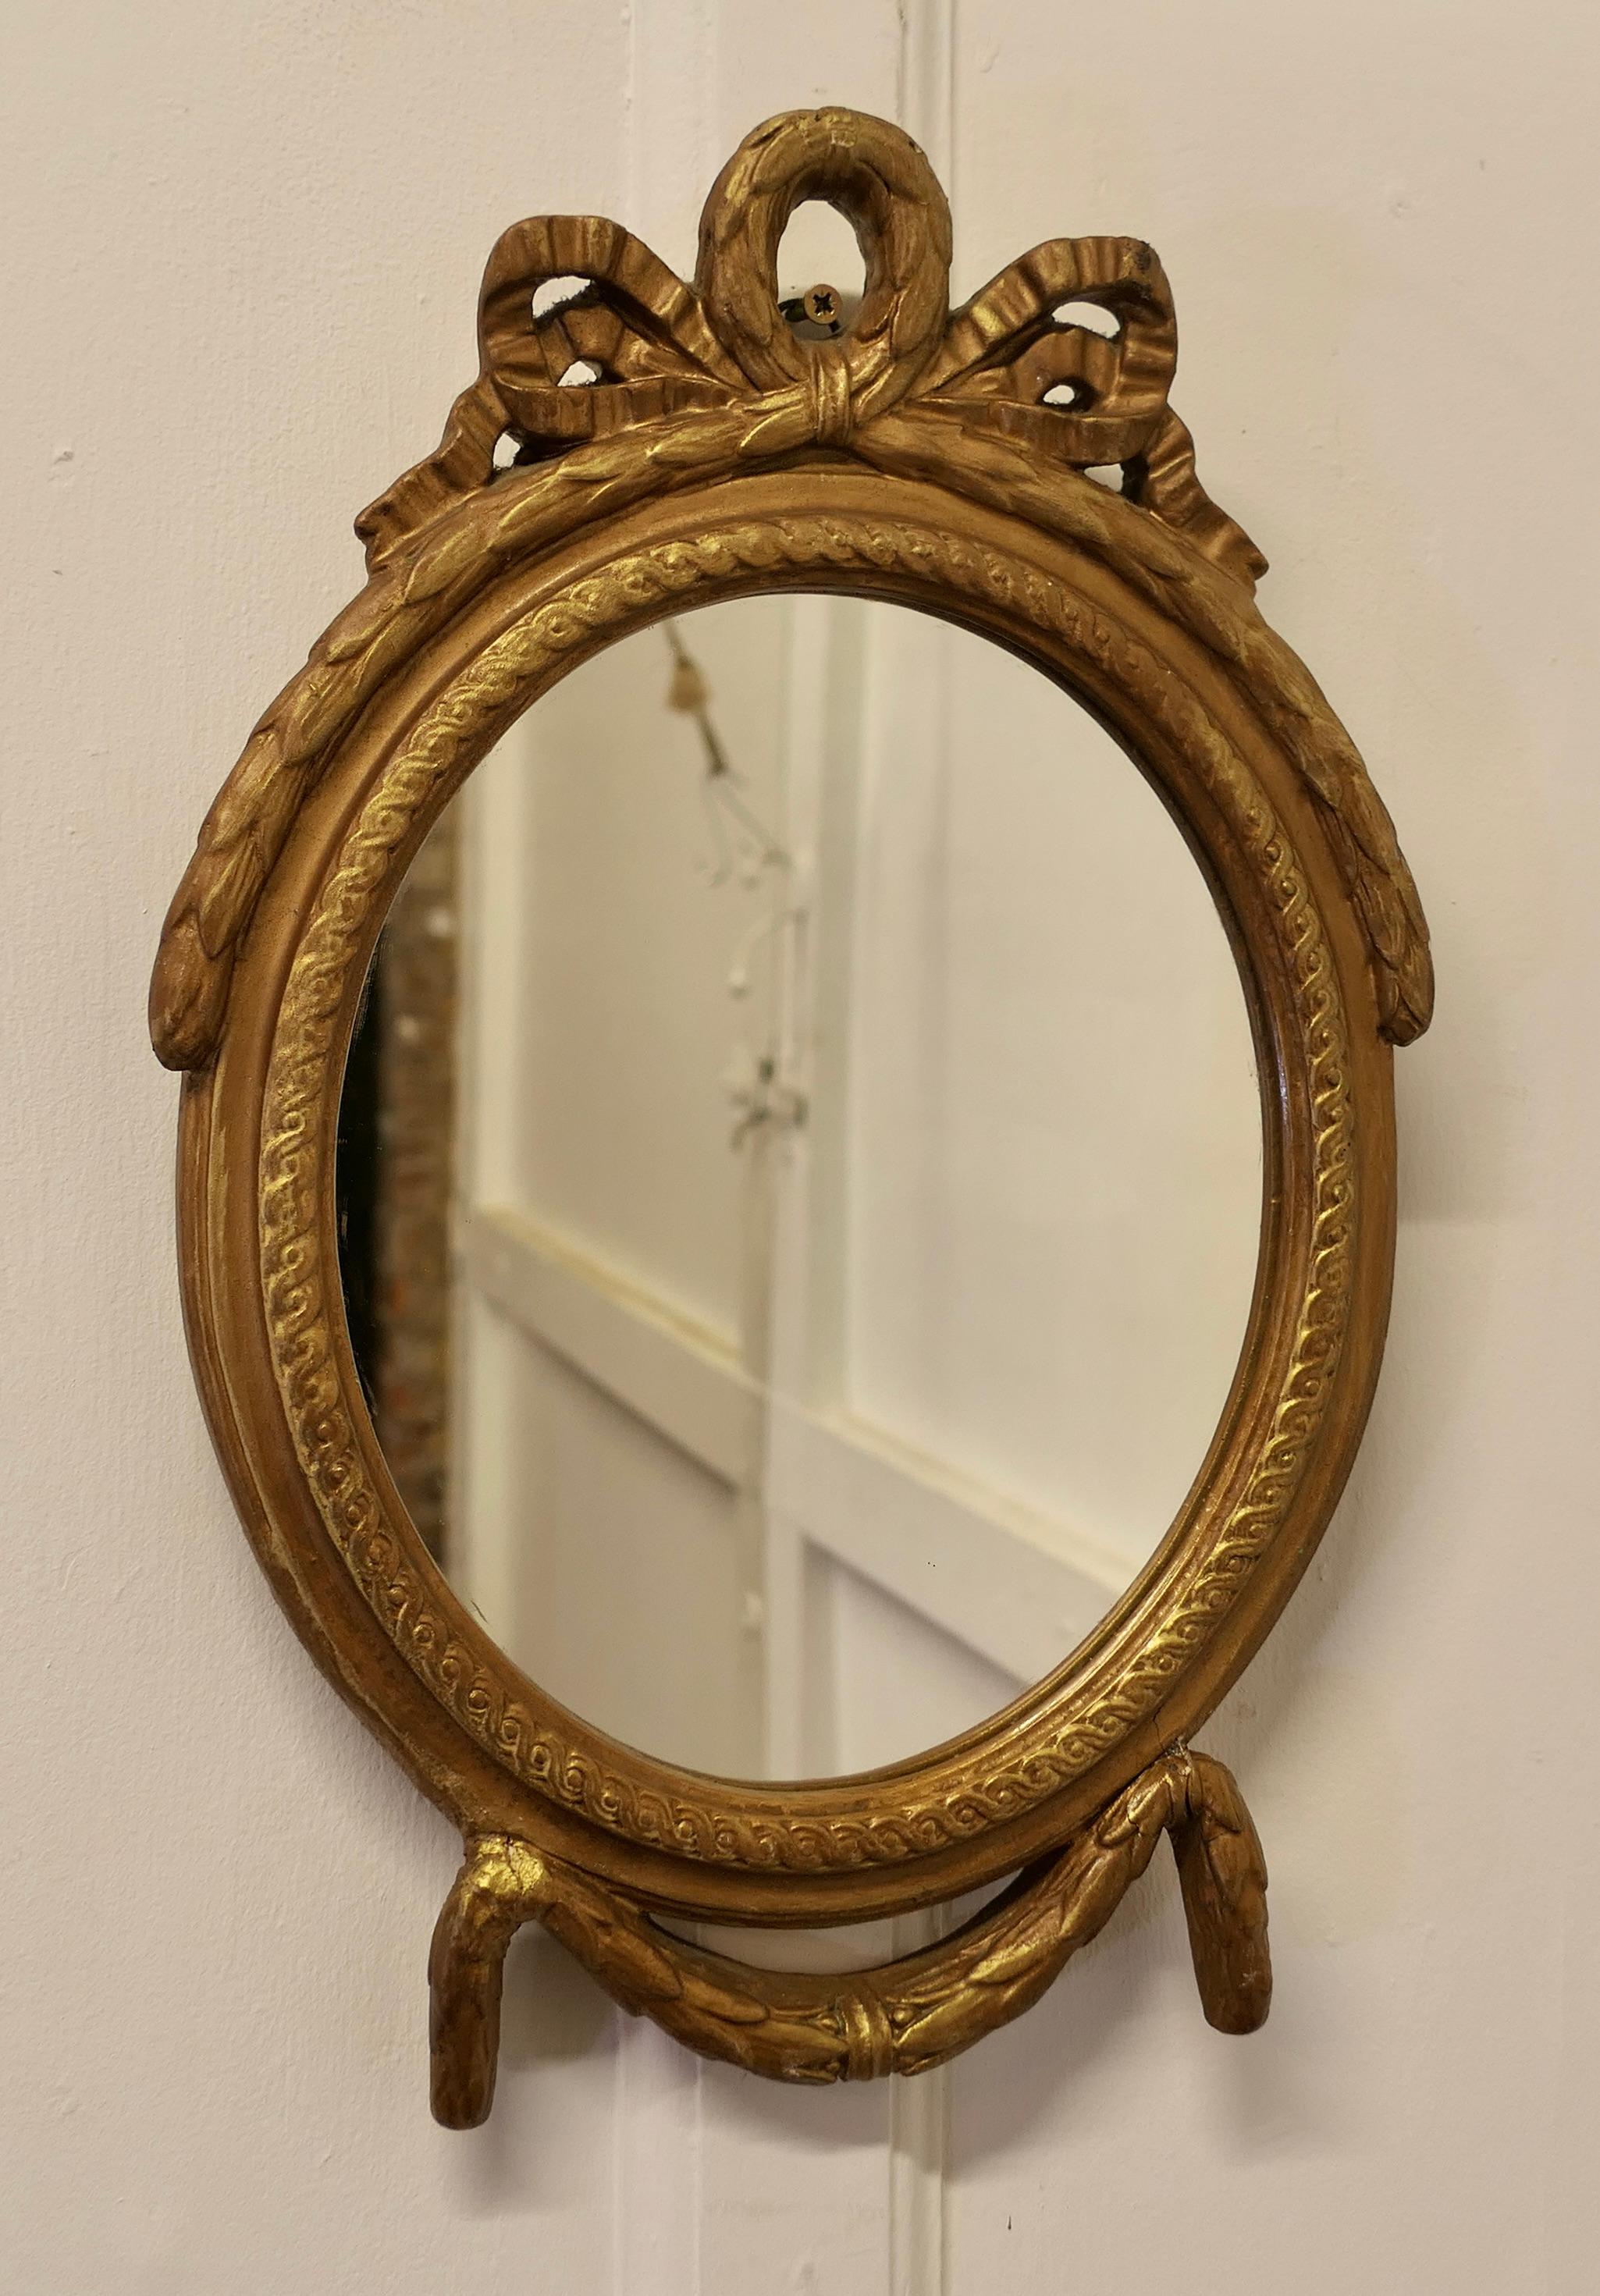 Decorative Gilt Oval Mirror

This Mirror has a 1.5” wide moulded oval frame, it has a decorative ribbon swag at the top and this a good dark gilt finish
The Oval frame is in attractive condition 
The mirror is 12” wide and 19” tall 
FB52